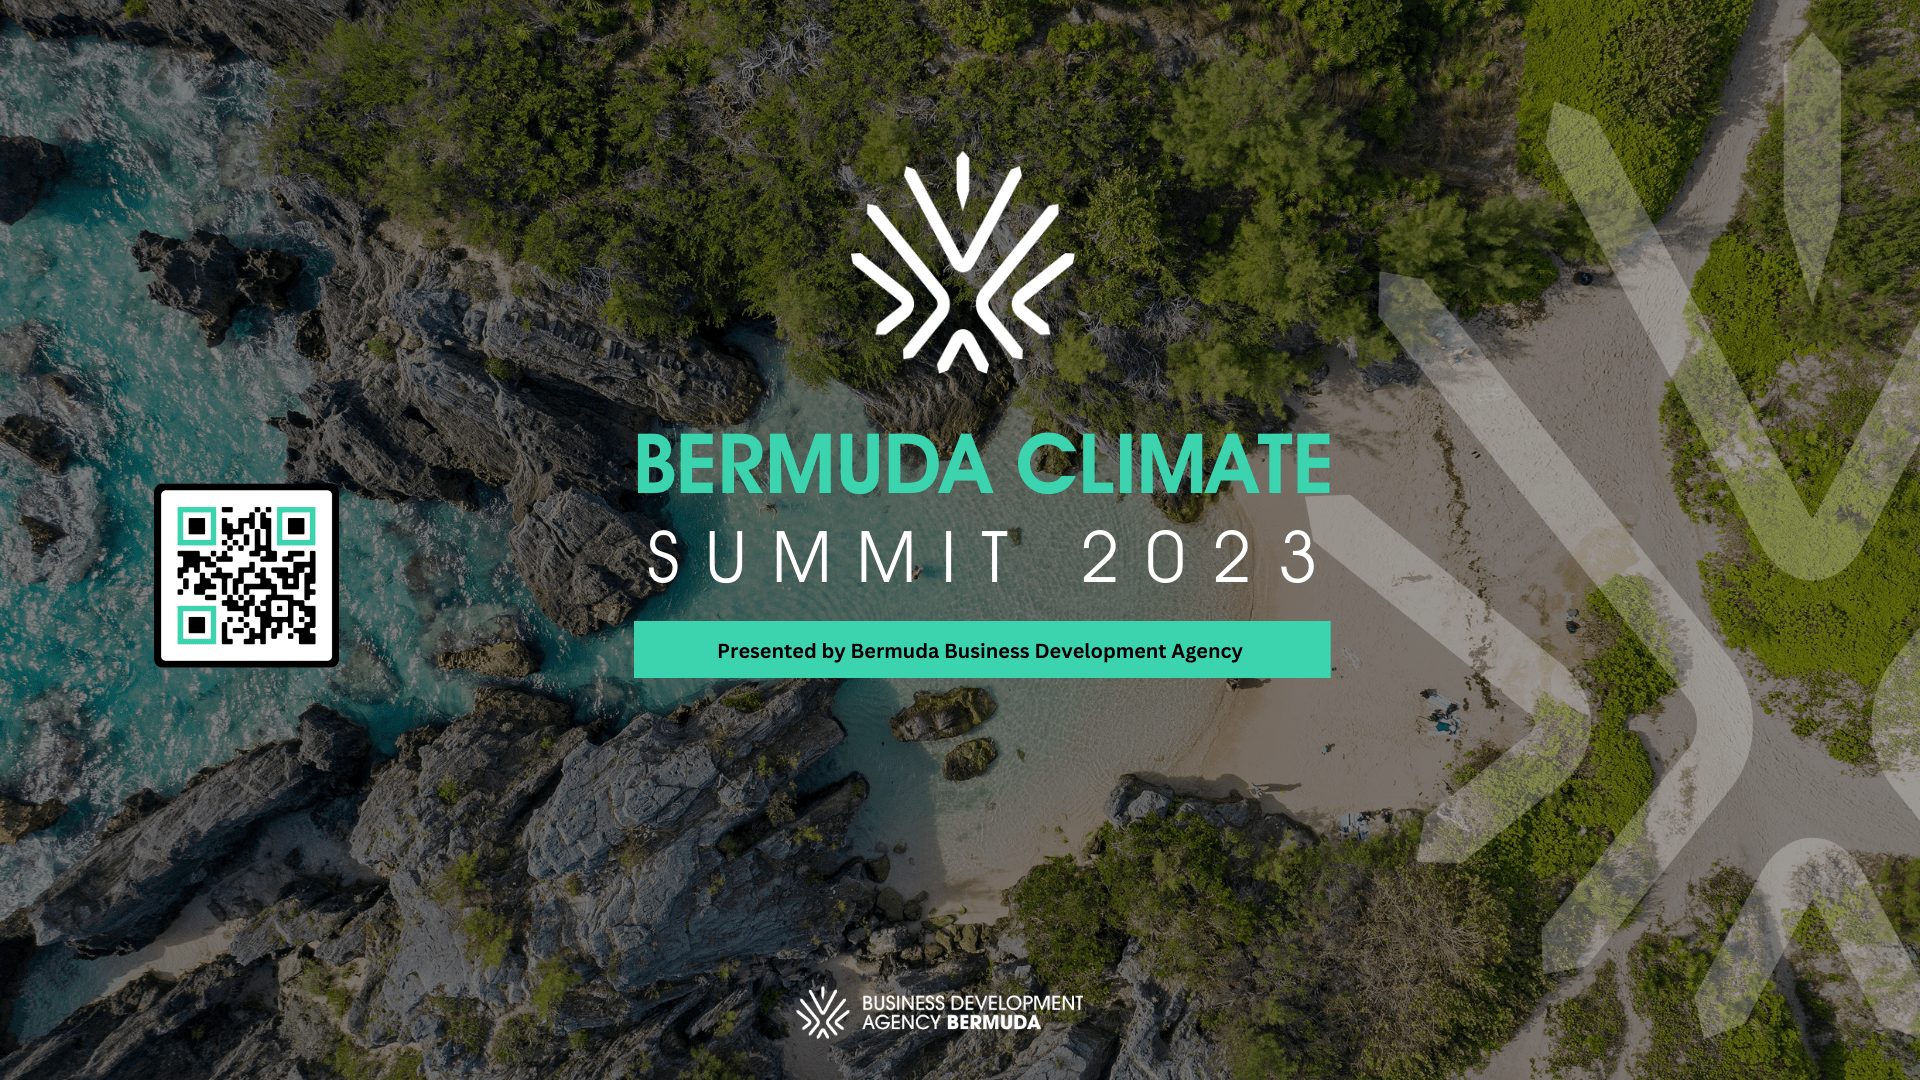 Managing Director of The Nature Conservancy to Speak at Bermuda Climate Summit